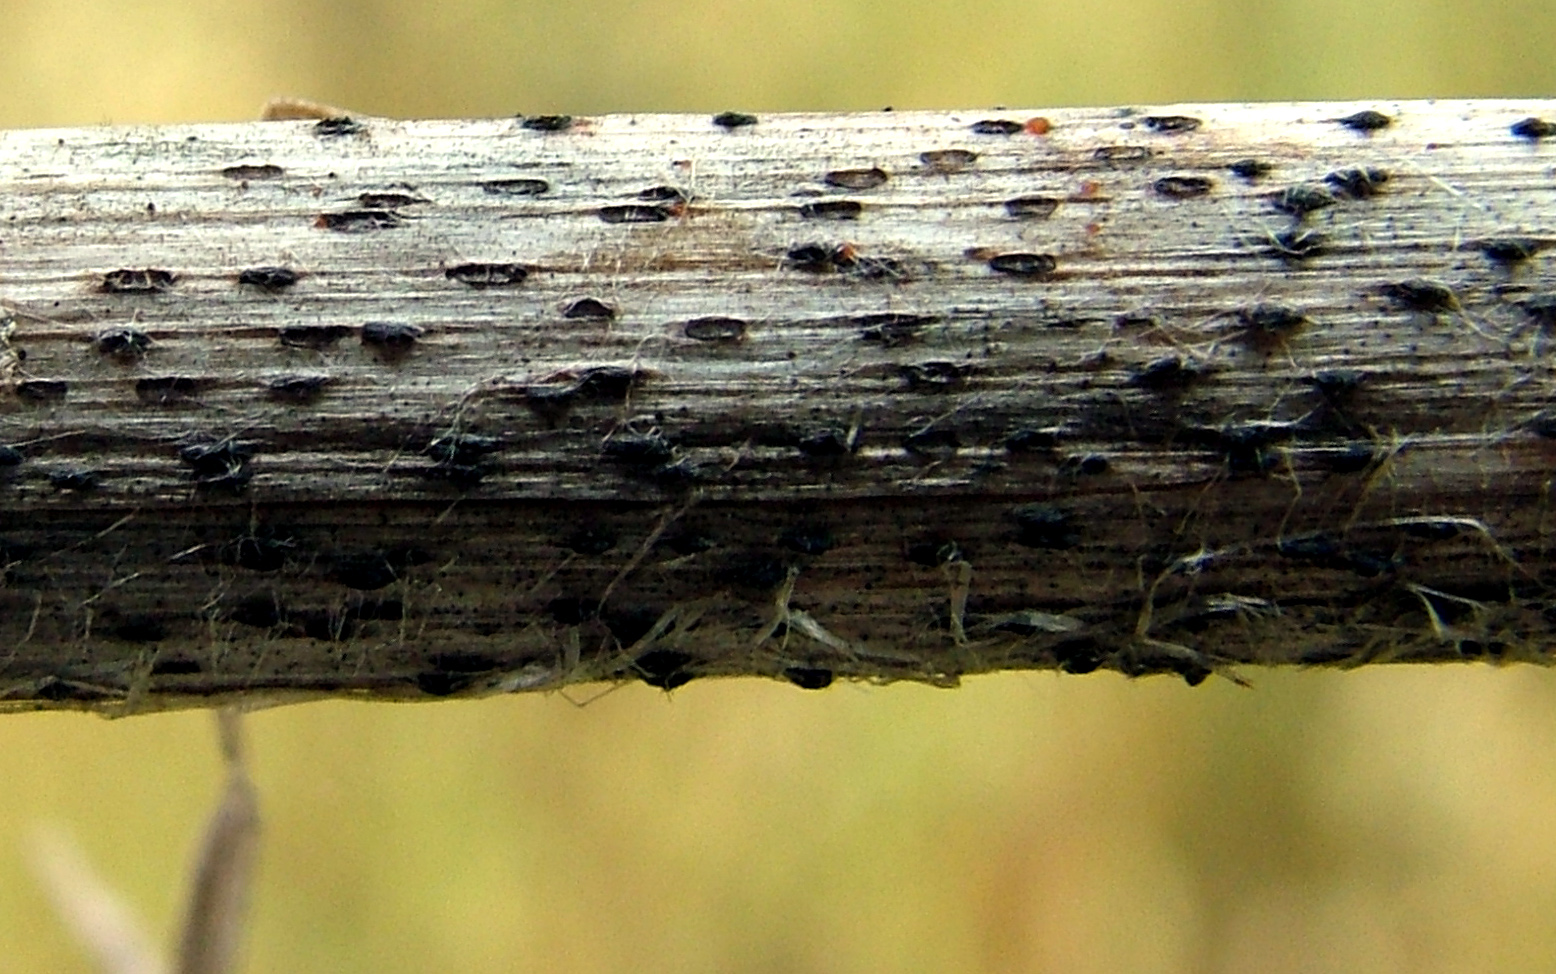 Advanced tan spot damage on an oat stem. Details in text following the image.